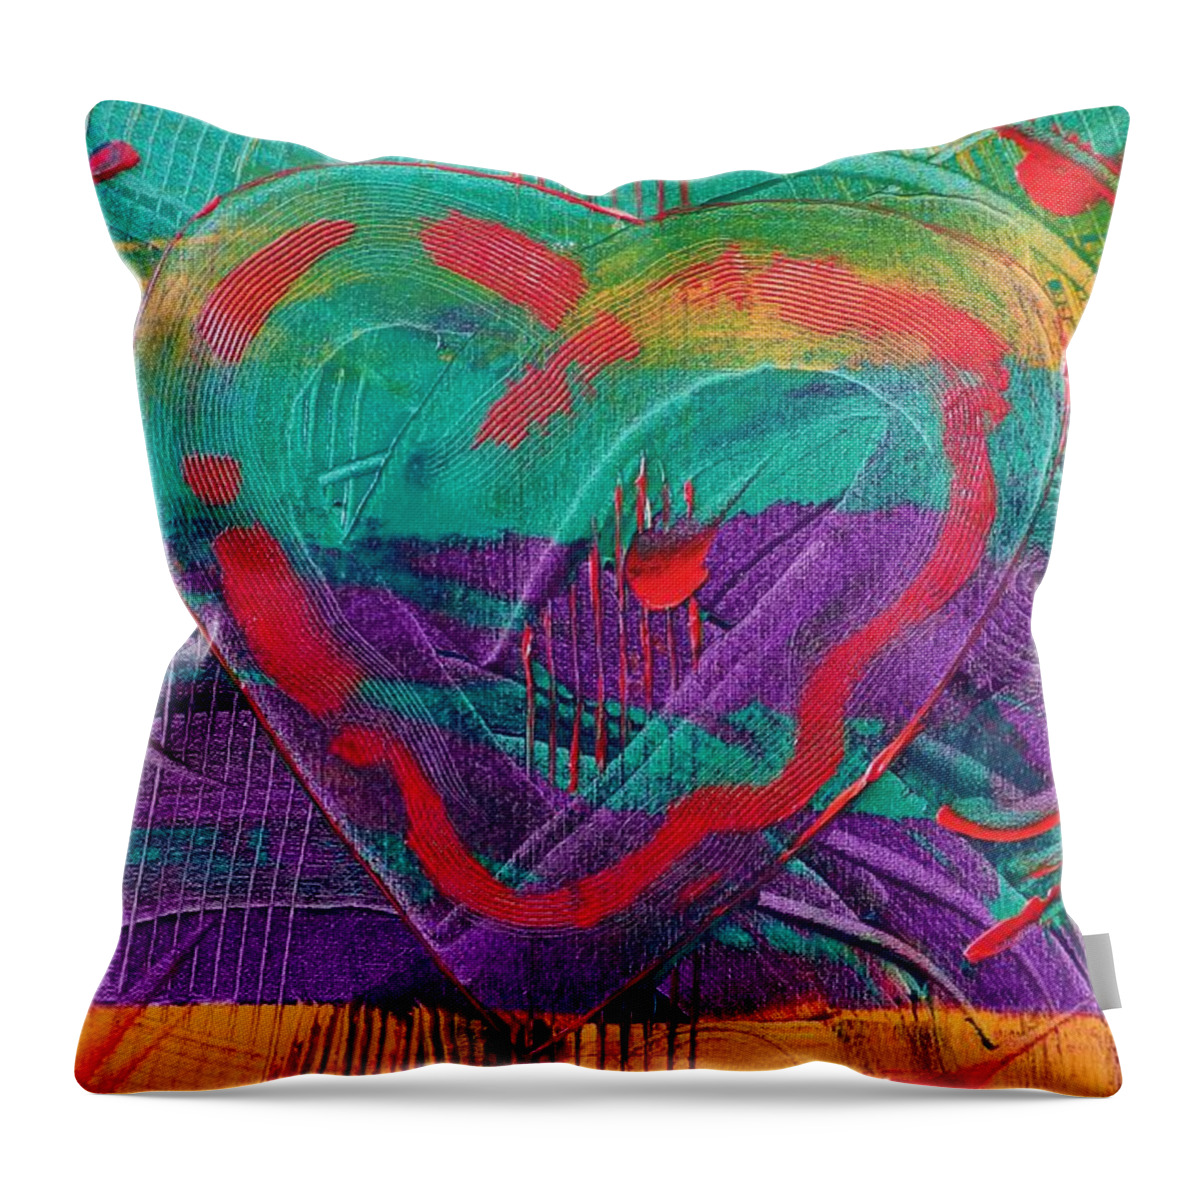 Heart Throw Pillow featuring the painting Starting To Love by Bill King